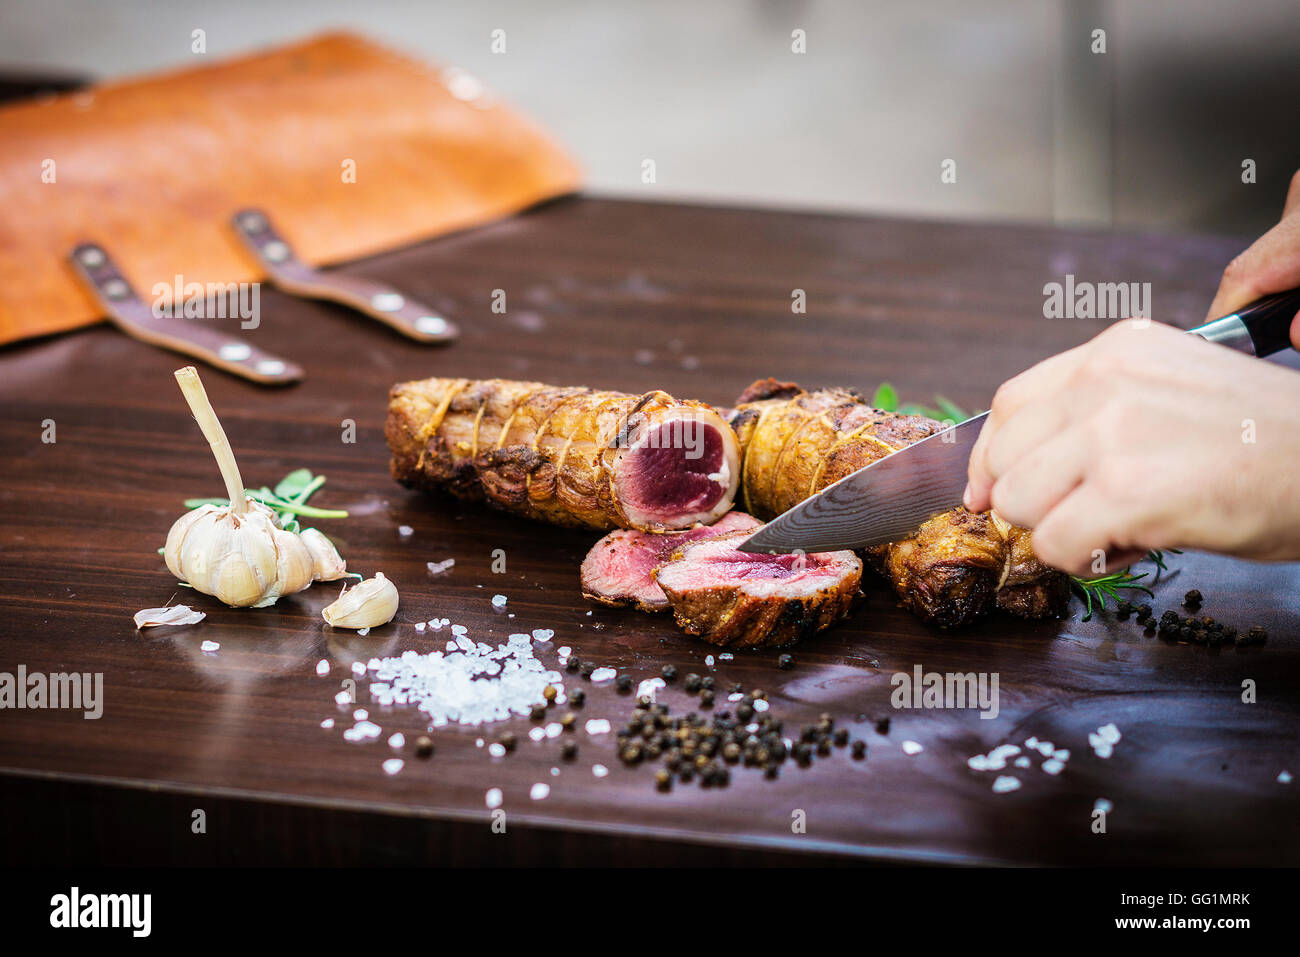 serving carving roast pork meat roll meal in rustic style with seasonings Stock Photo